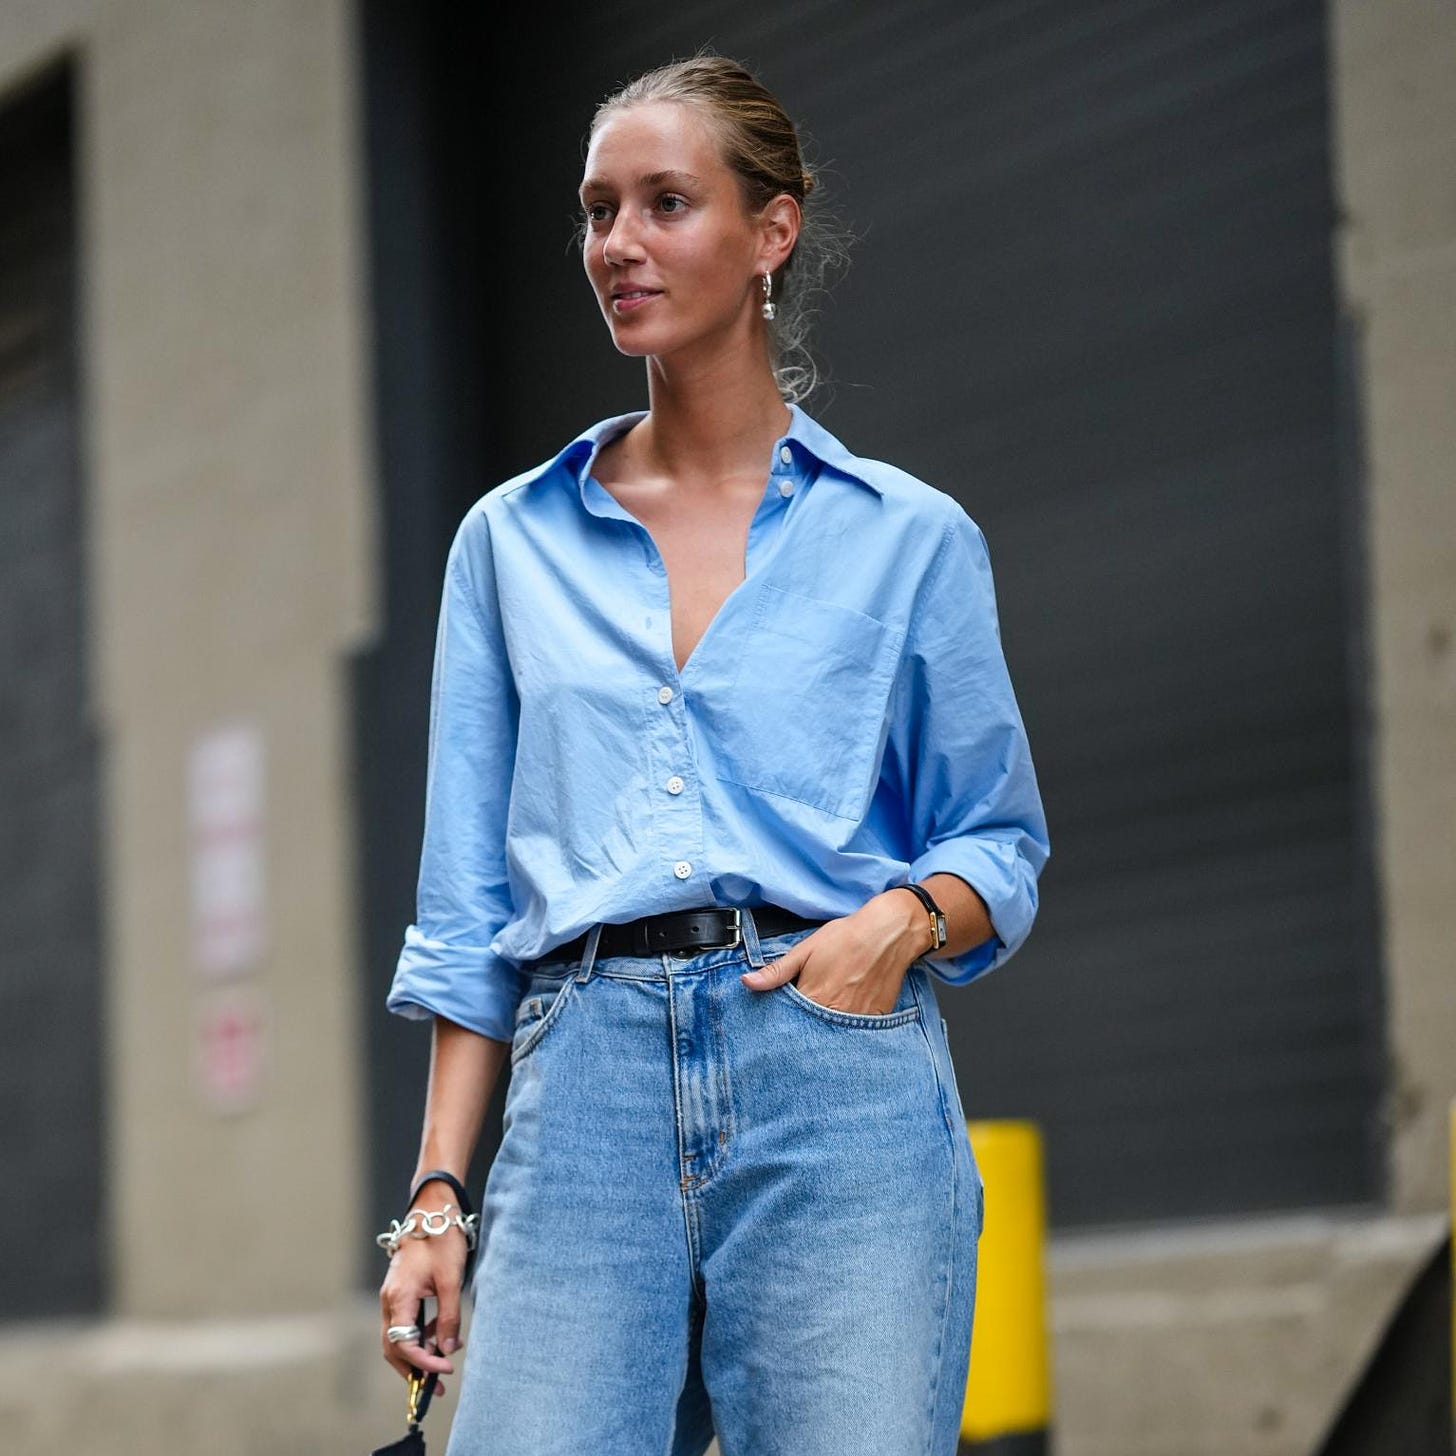 The best shirts have a boyfriend fit — always tuck in